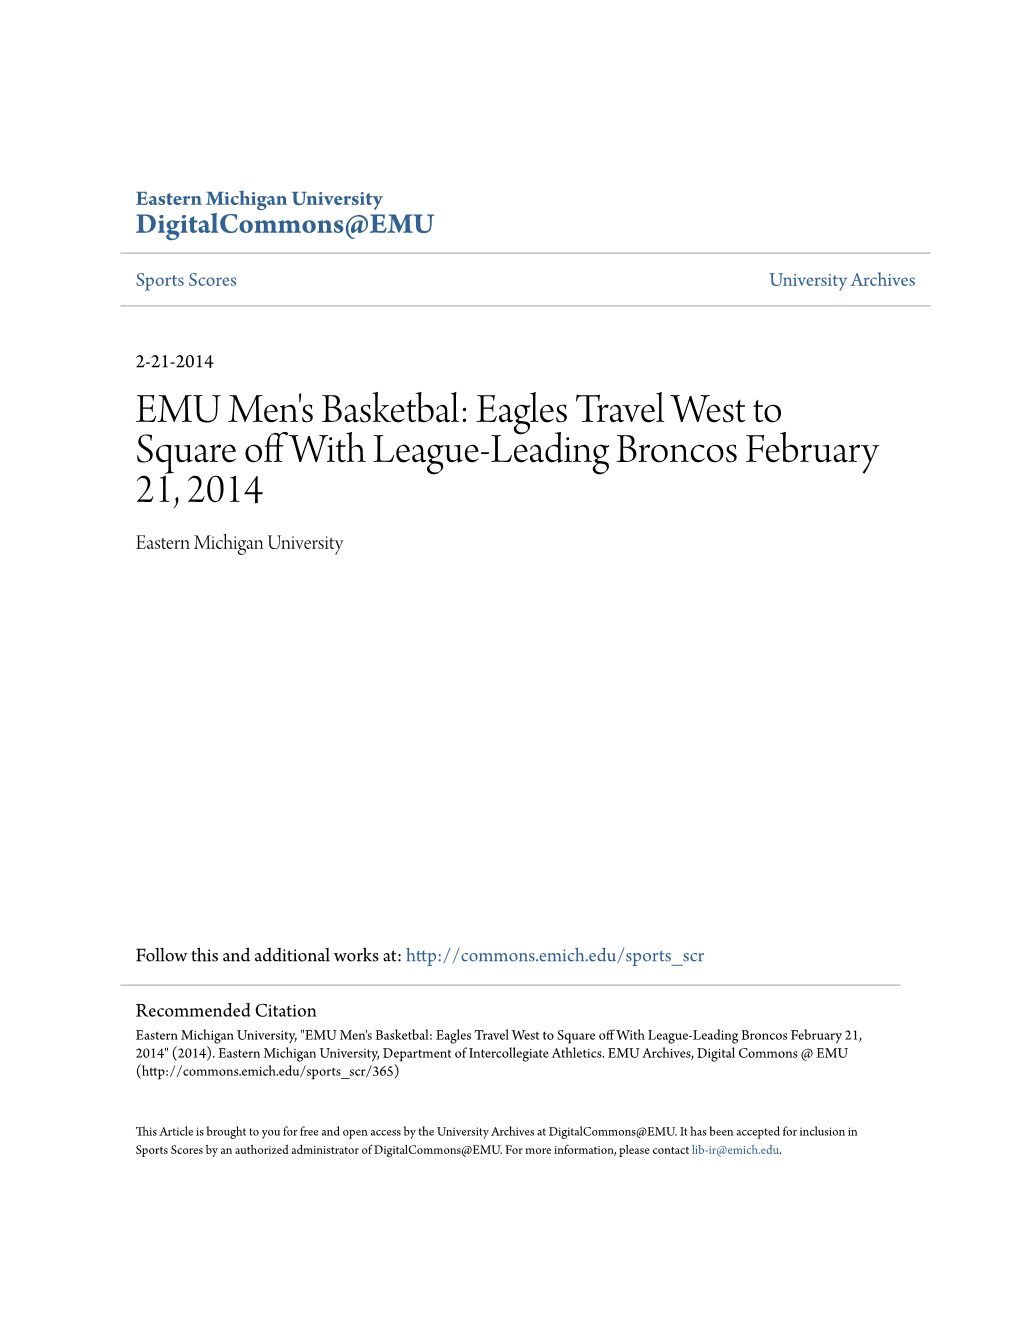 EMU Men's Basketbal: Eagles Travel West to Square Off with League